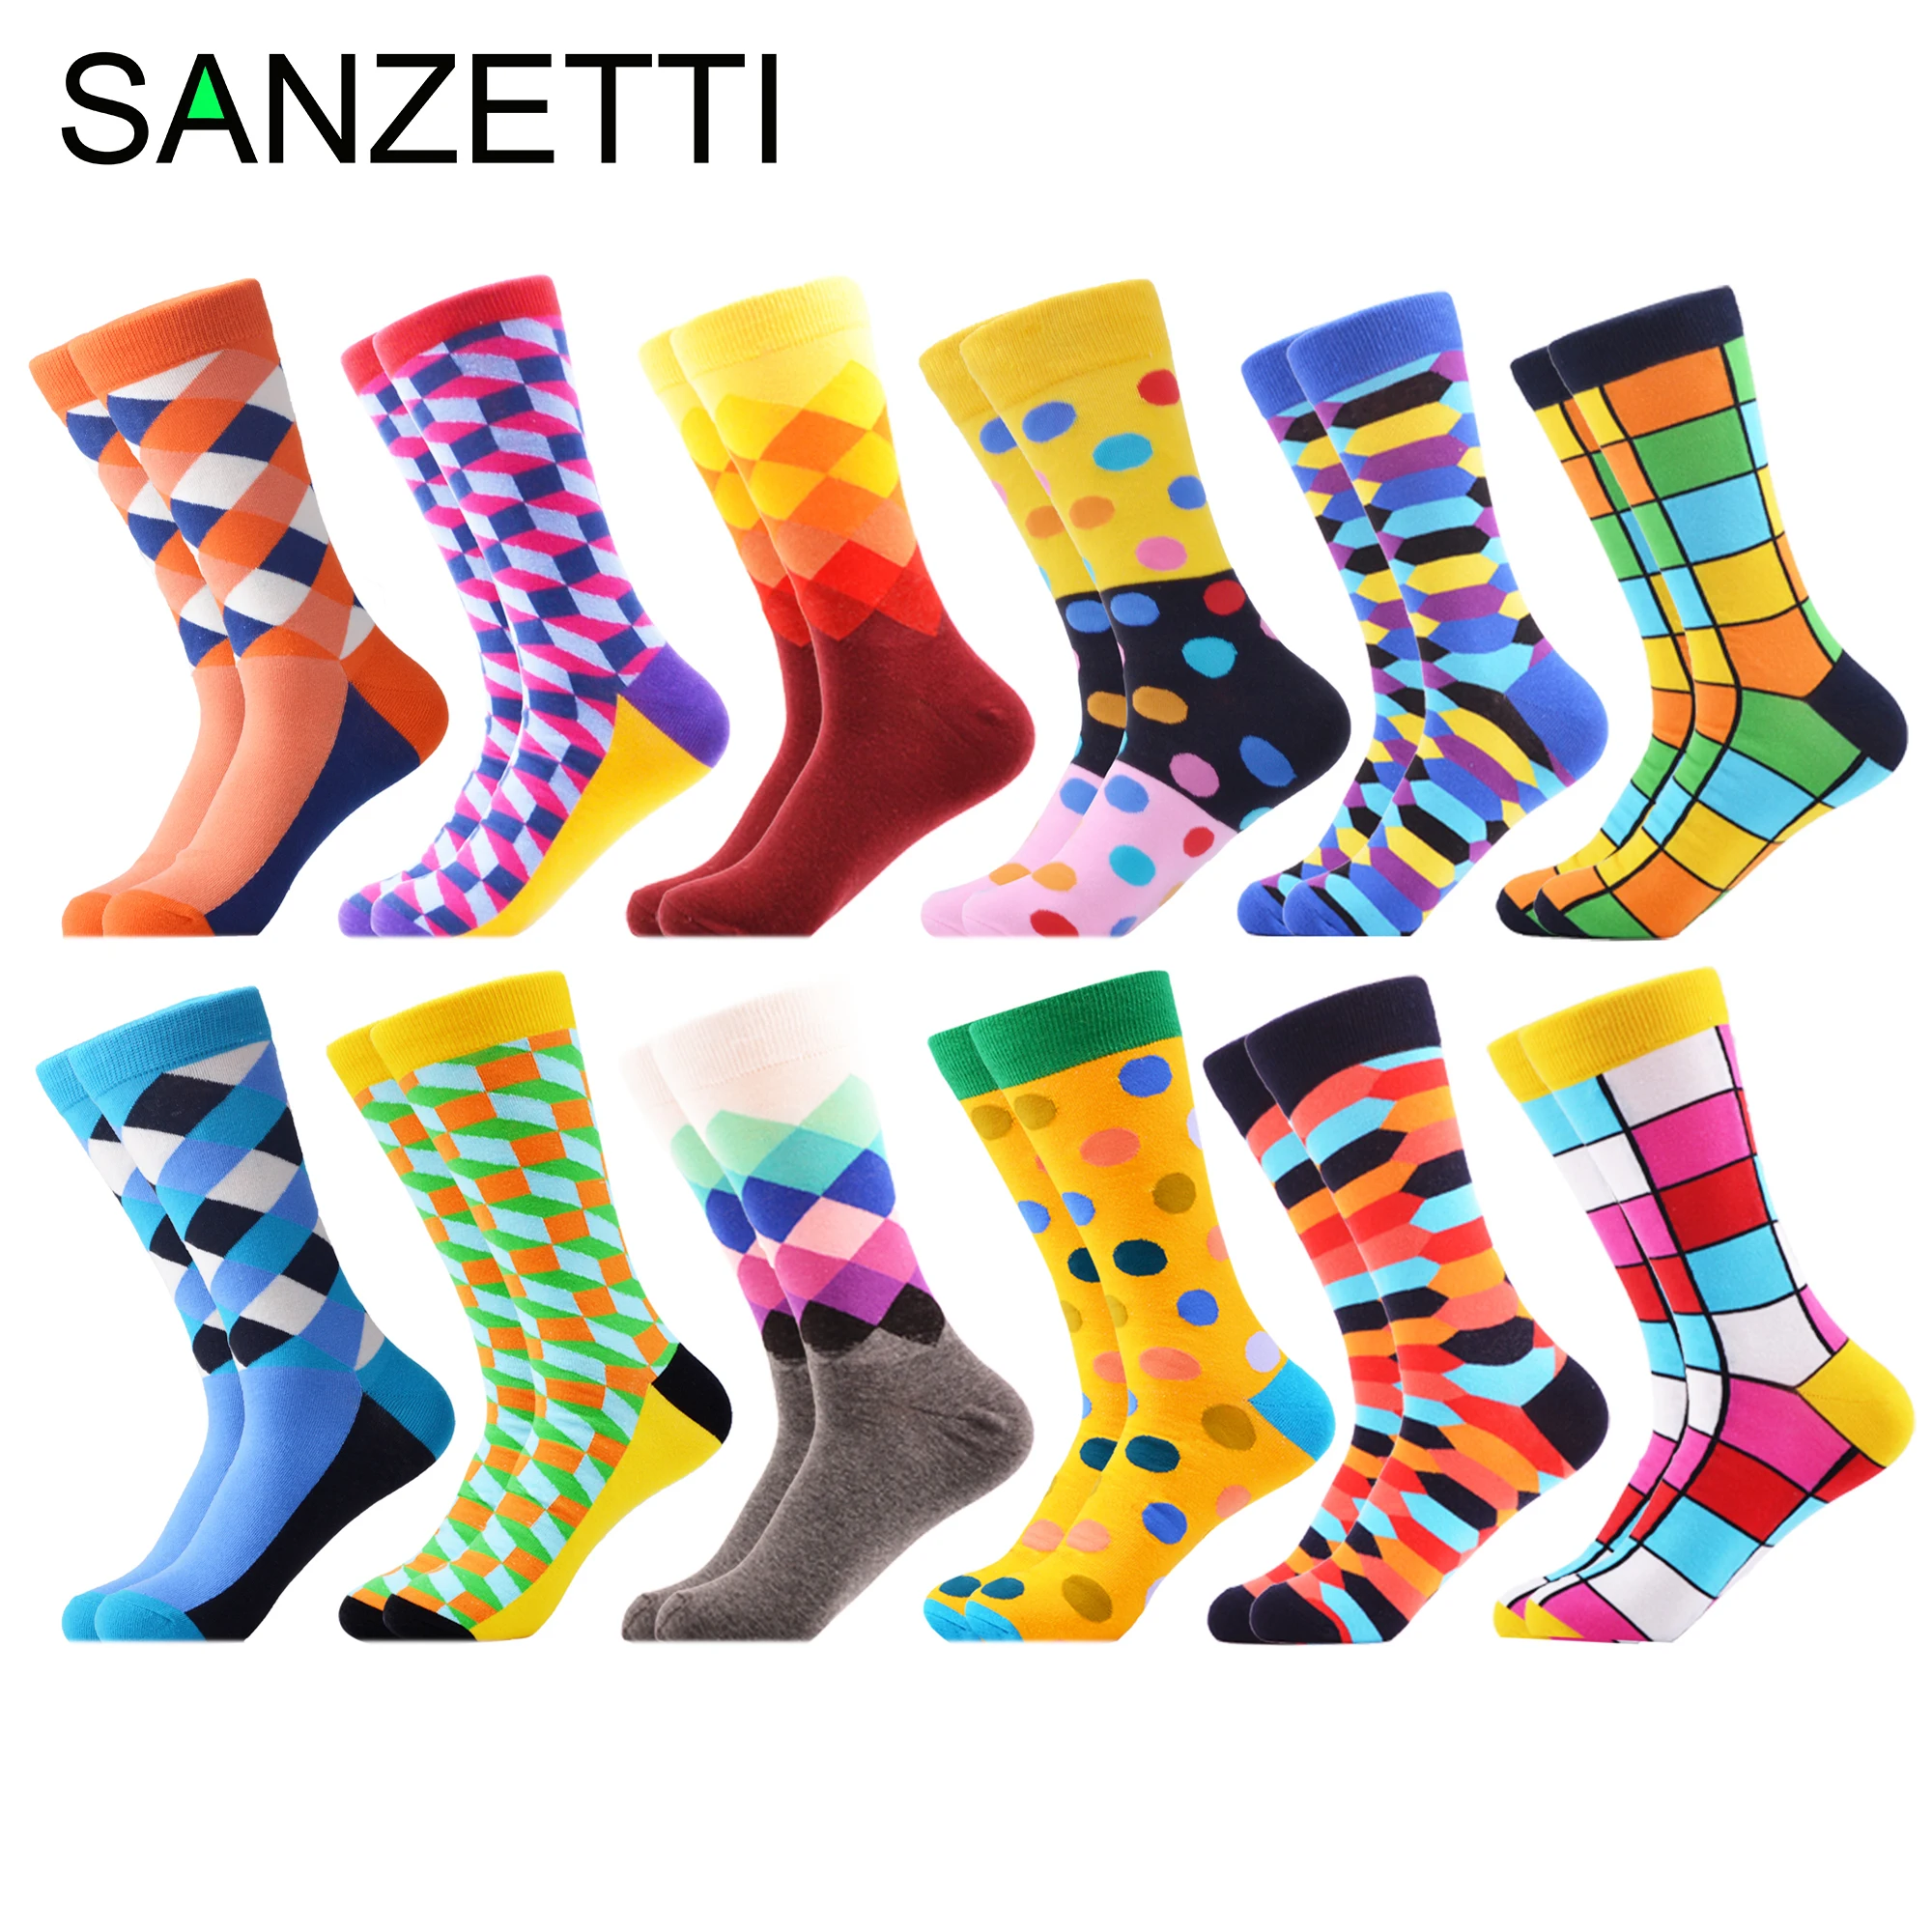 

SANZETTI 12 Pairs/Lot Wholesale Funny Men's Combed Cotton Colorful Socks Ostrich Shark Pattern Novelty Causal Dress Wedding Sock